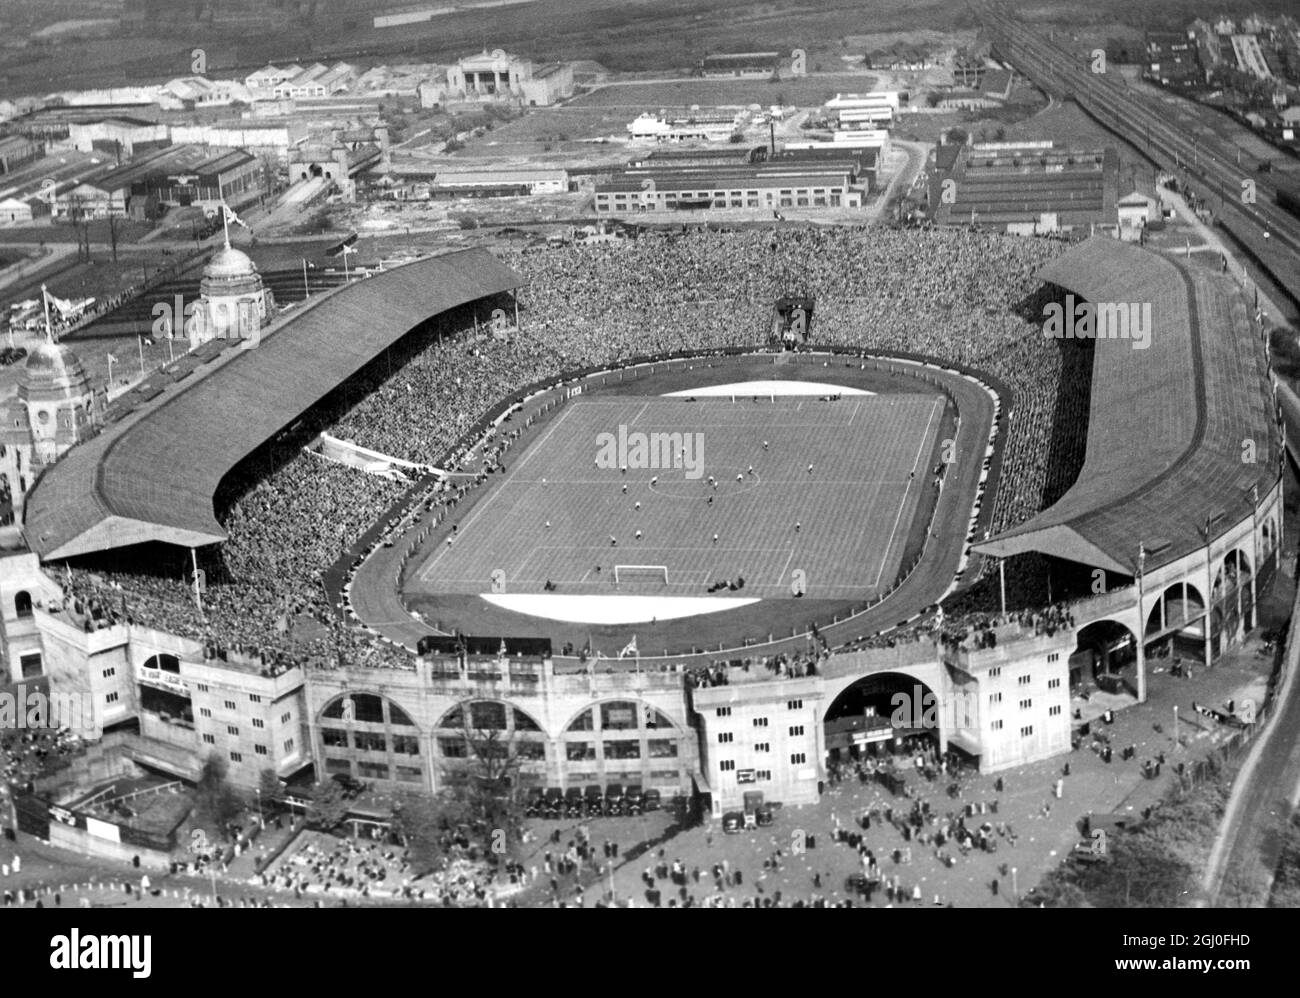 An aerial view of Wembley Stadium taken as a capacity crowd watched an ...